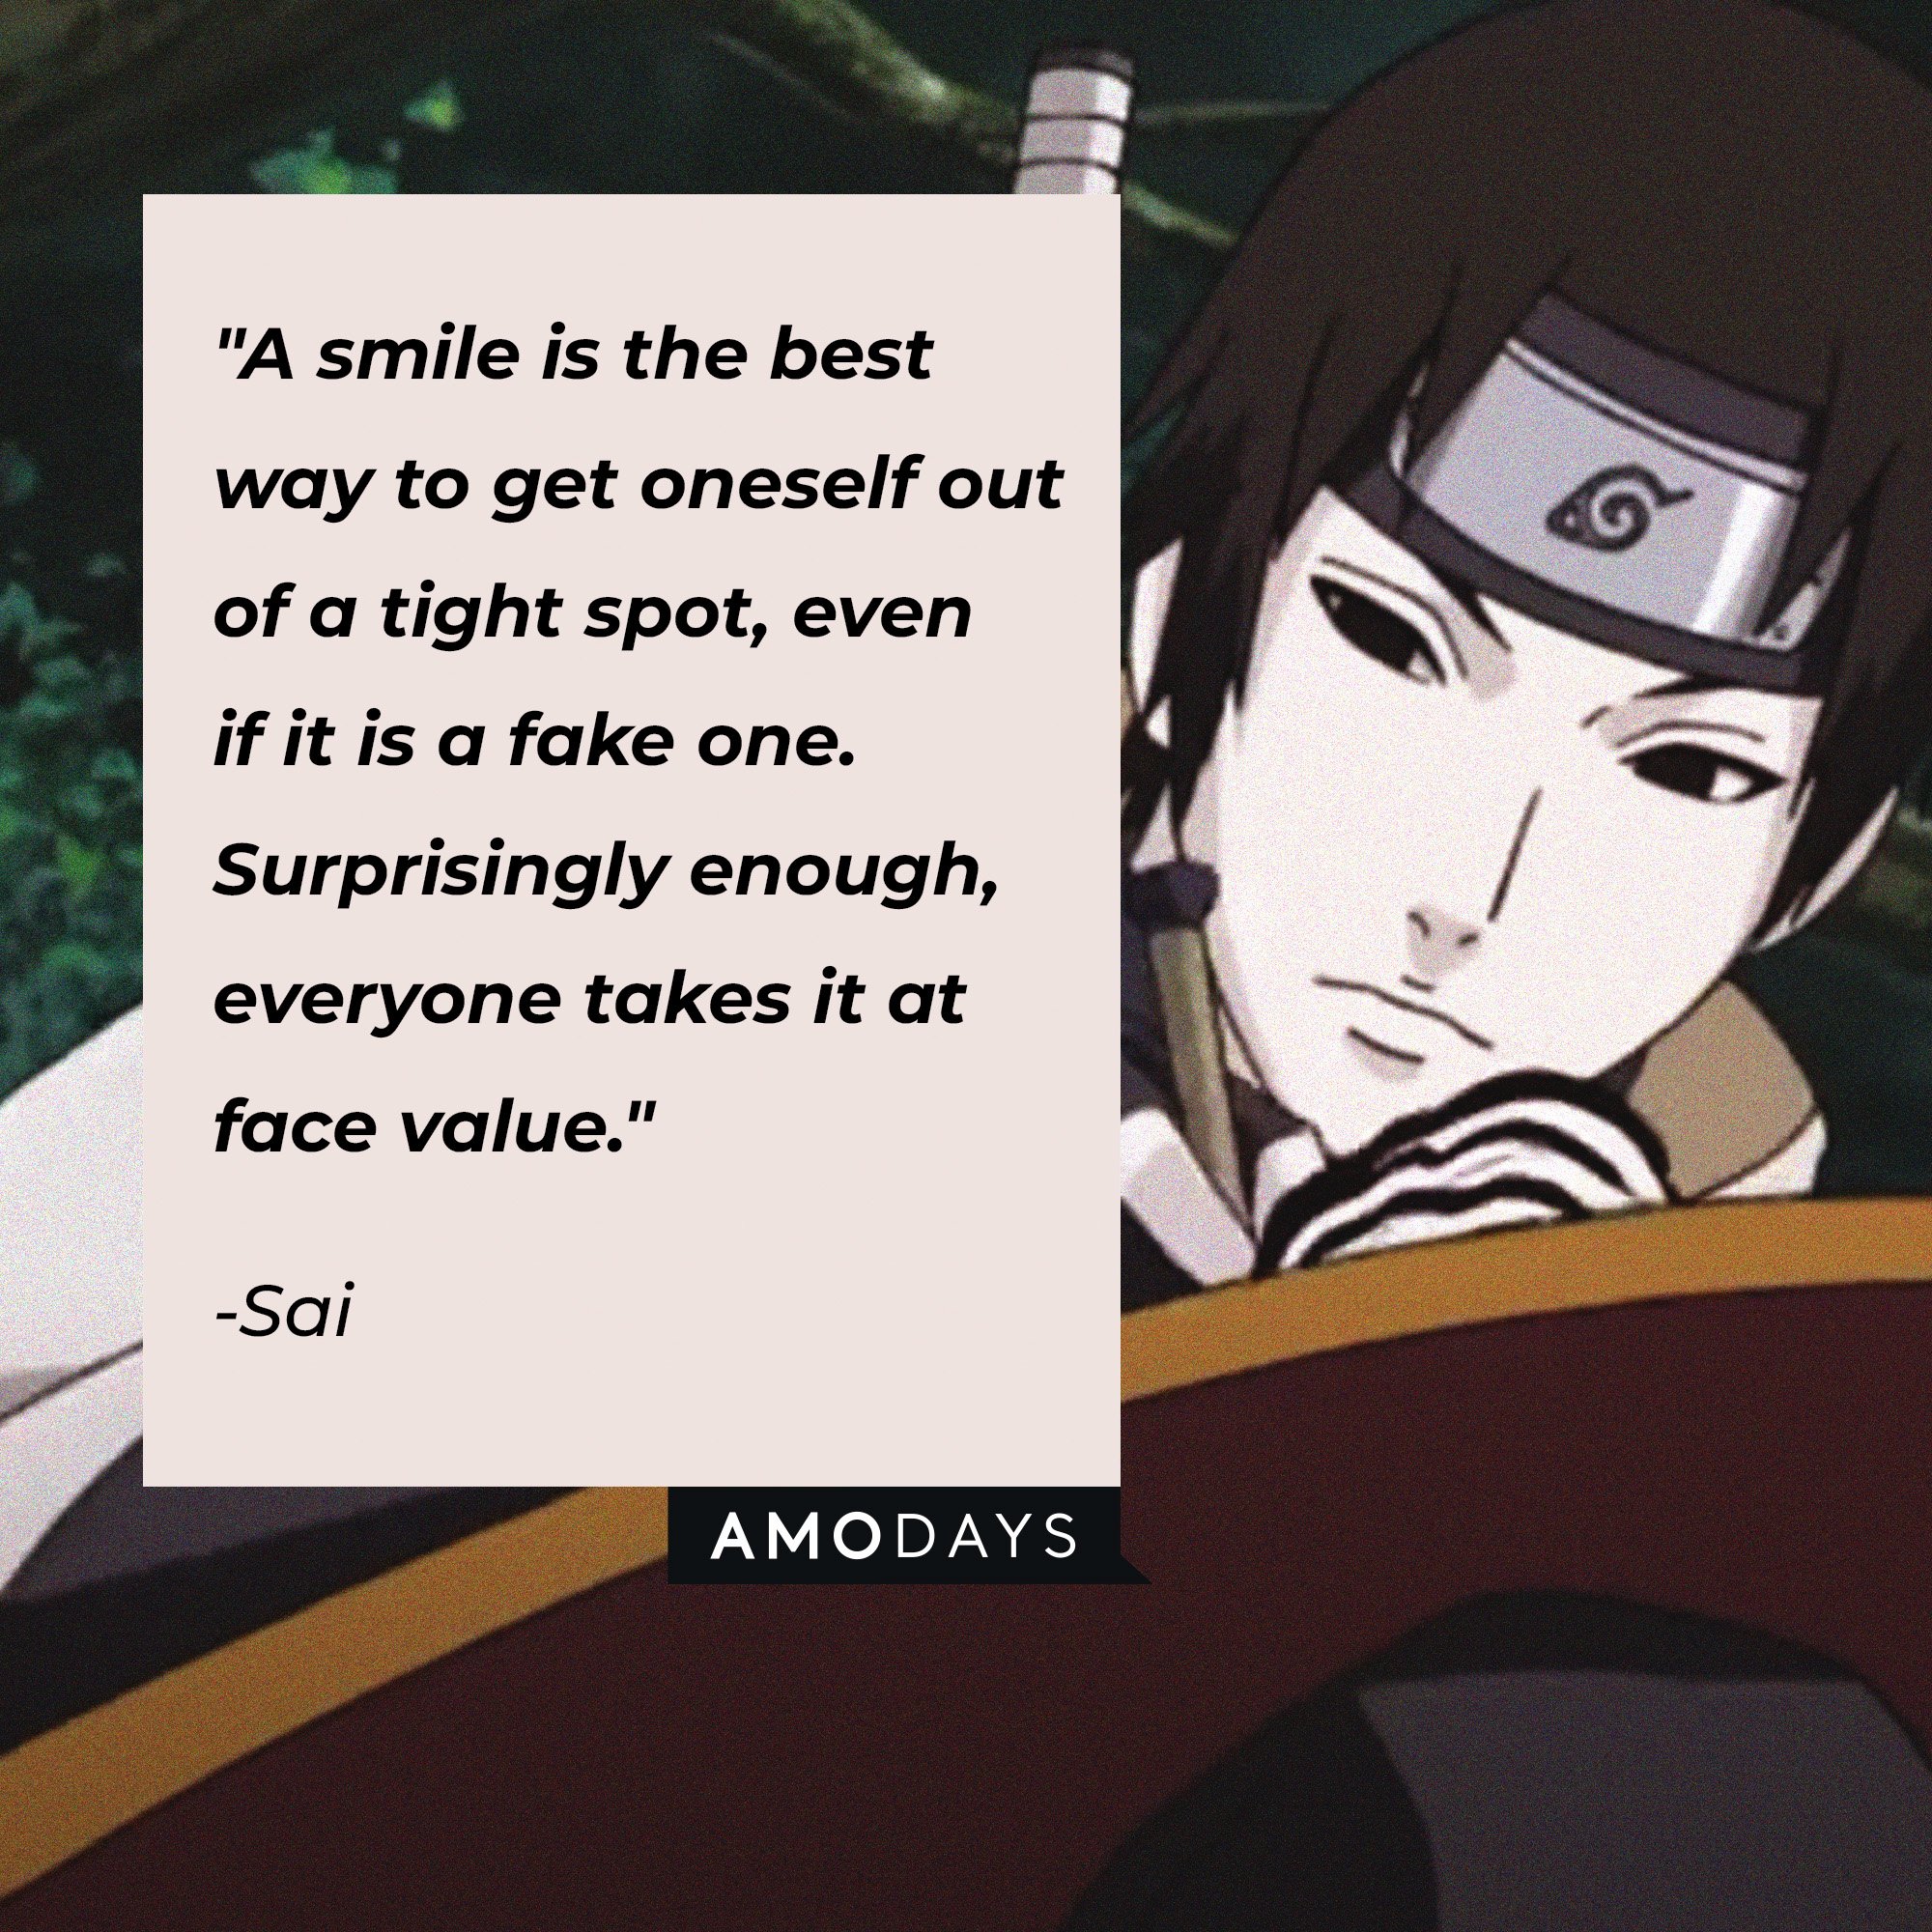  Sai's quote: "A smile is the best way to get oneself out of a tight spot, even if it is a fake one. Surprisingly enough, everyone takes it at face value." | Image: AmoDays